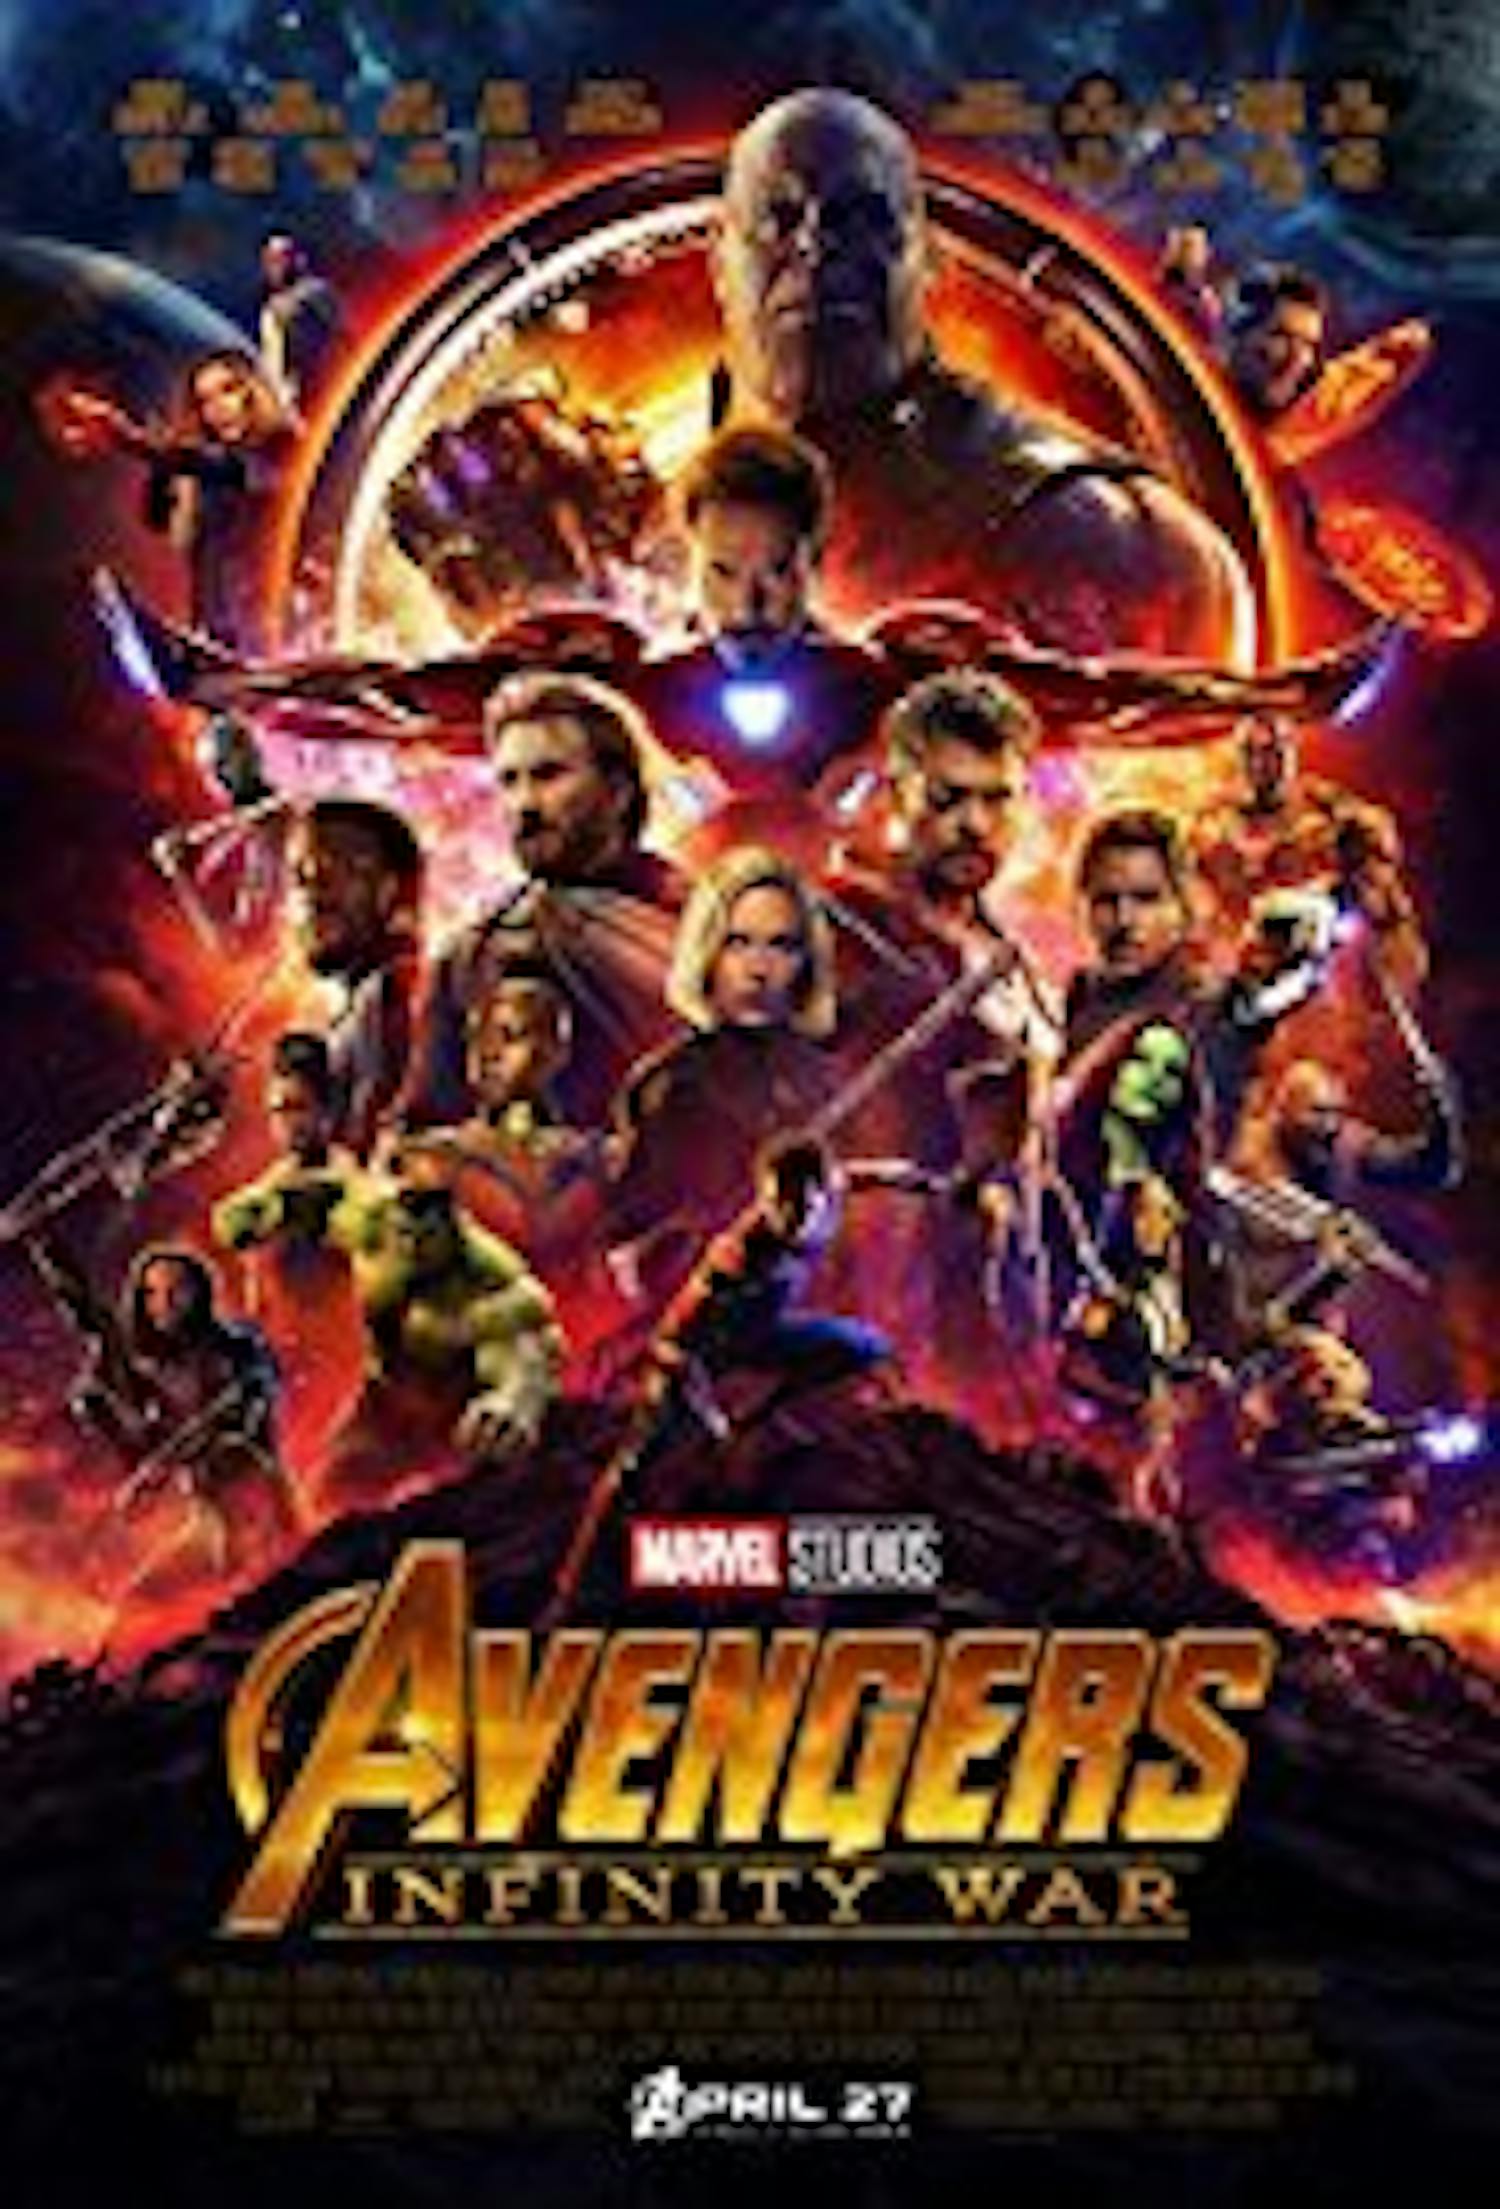 “Avengers: Infinity War” is the only film that matters this month. It is 10 years in the making, coming almost a decade to the day after “Iron Man” kicked off the Marvel Cinematic Universe in 2008.